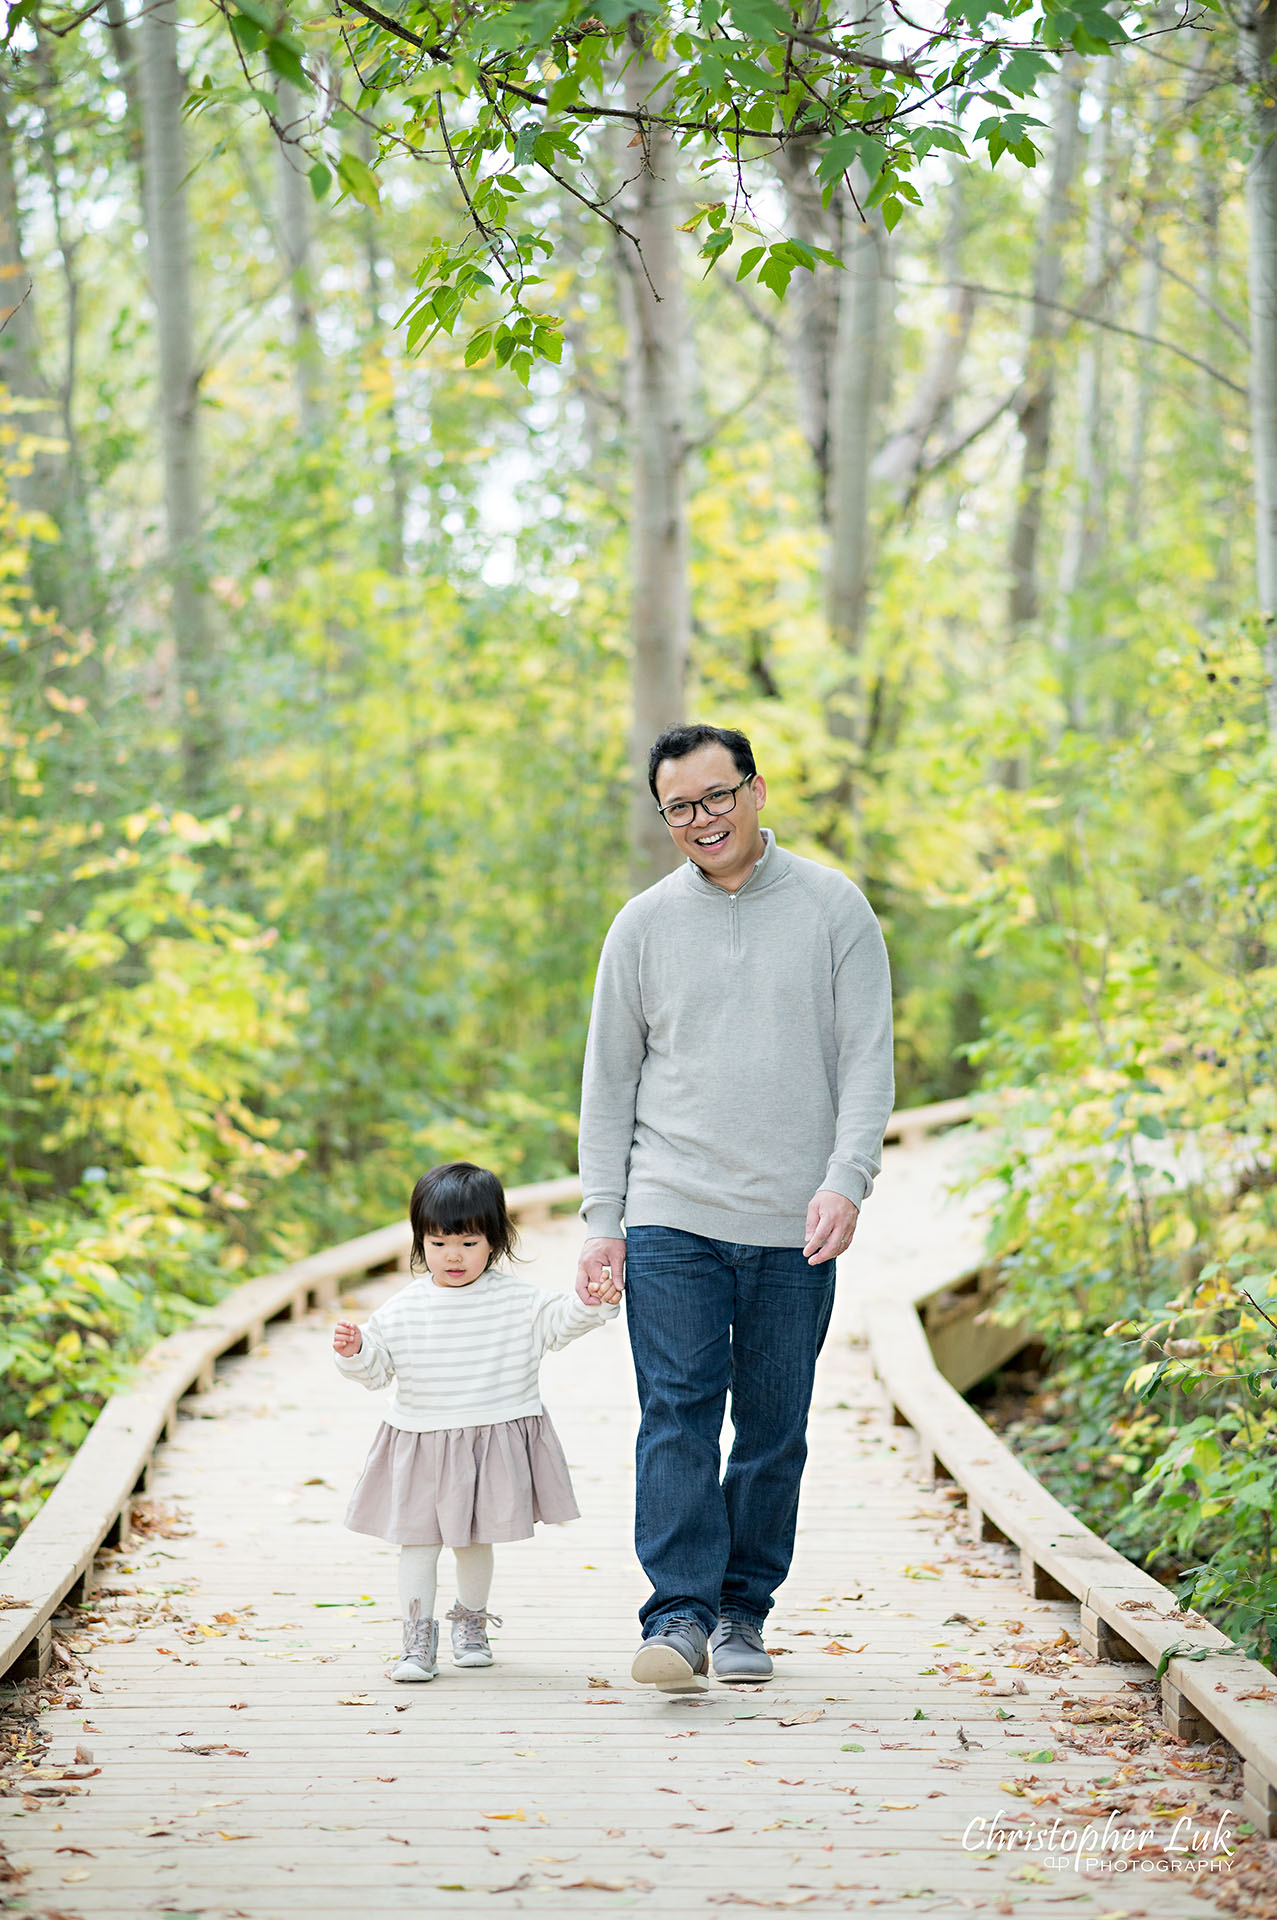 Christopher Luk Markham Family Photographer Autumn Leaves Fall Season Candid Photojournalistic Natural Bright Timeless Elegant Boardwalk Father Daughter Holding Hands Walking Together